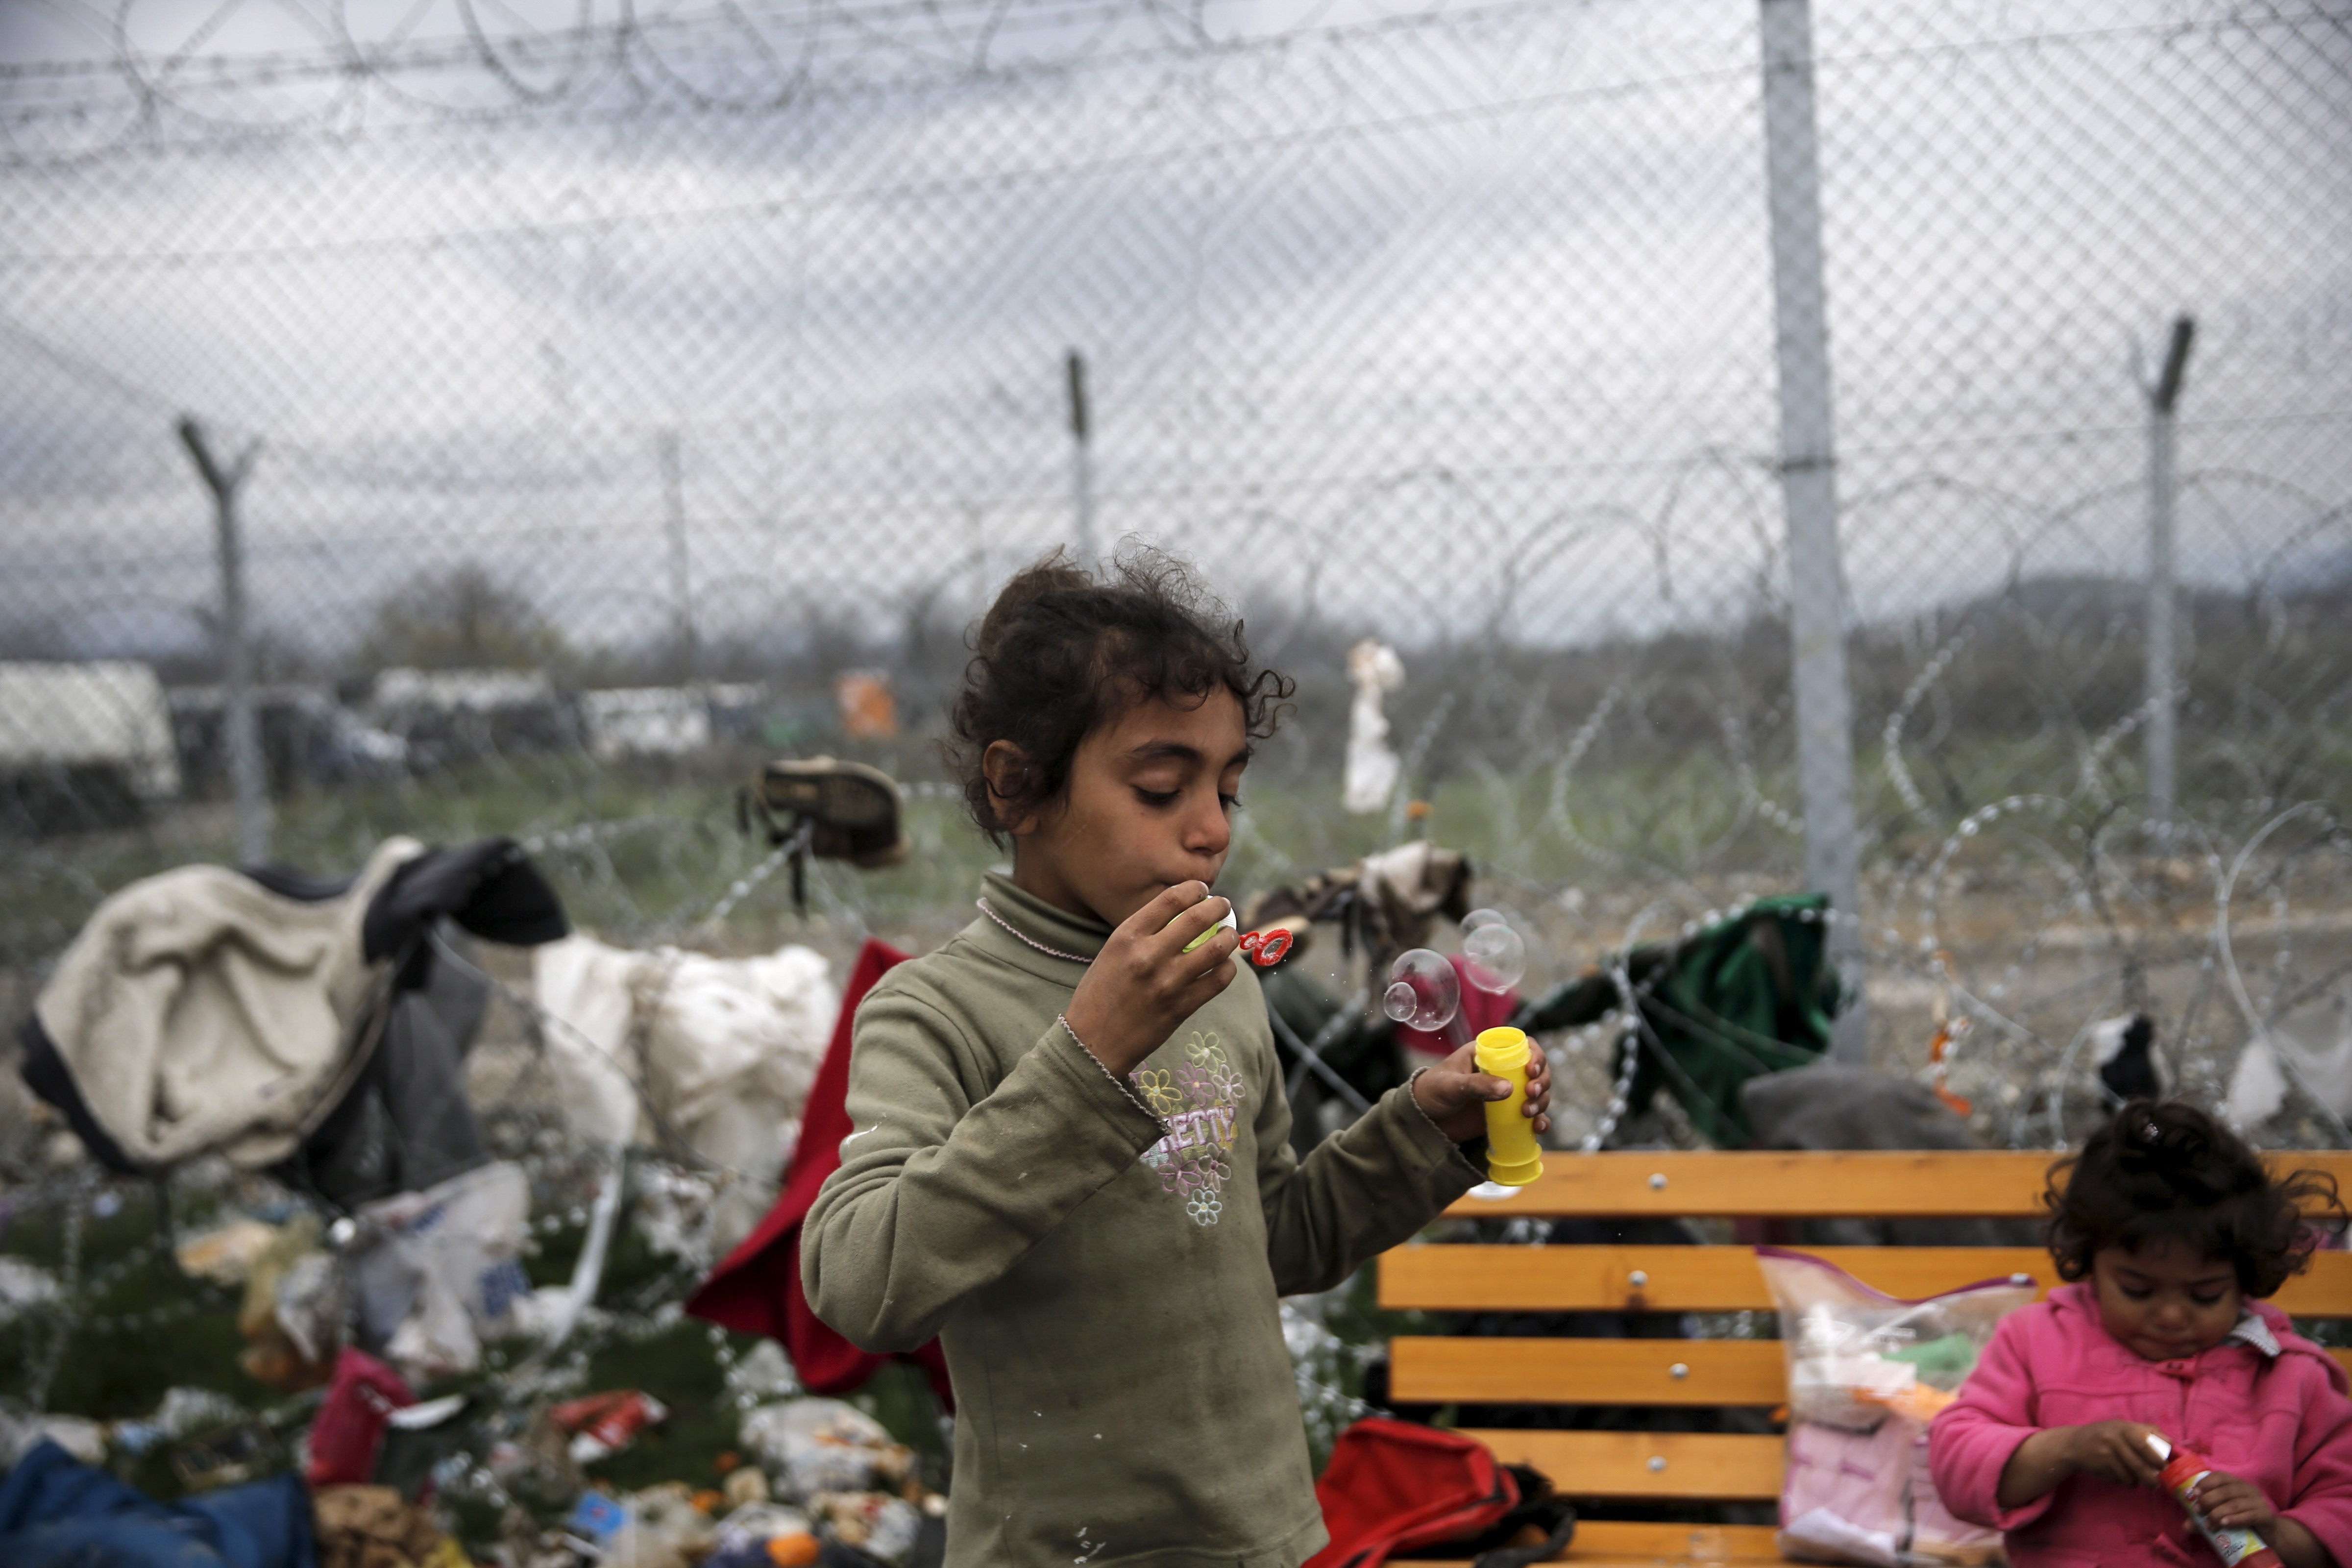 A Syrian refugee girl blows soap bubbles next to the border fence at the Greek-Macedonian border, at a makeshift camp for refugees and migrants near the village of Idomeni, Greece March 16, 2016 (Alkis Konstantinidis—Reuters)